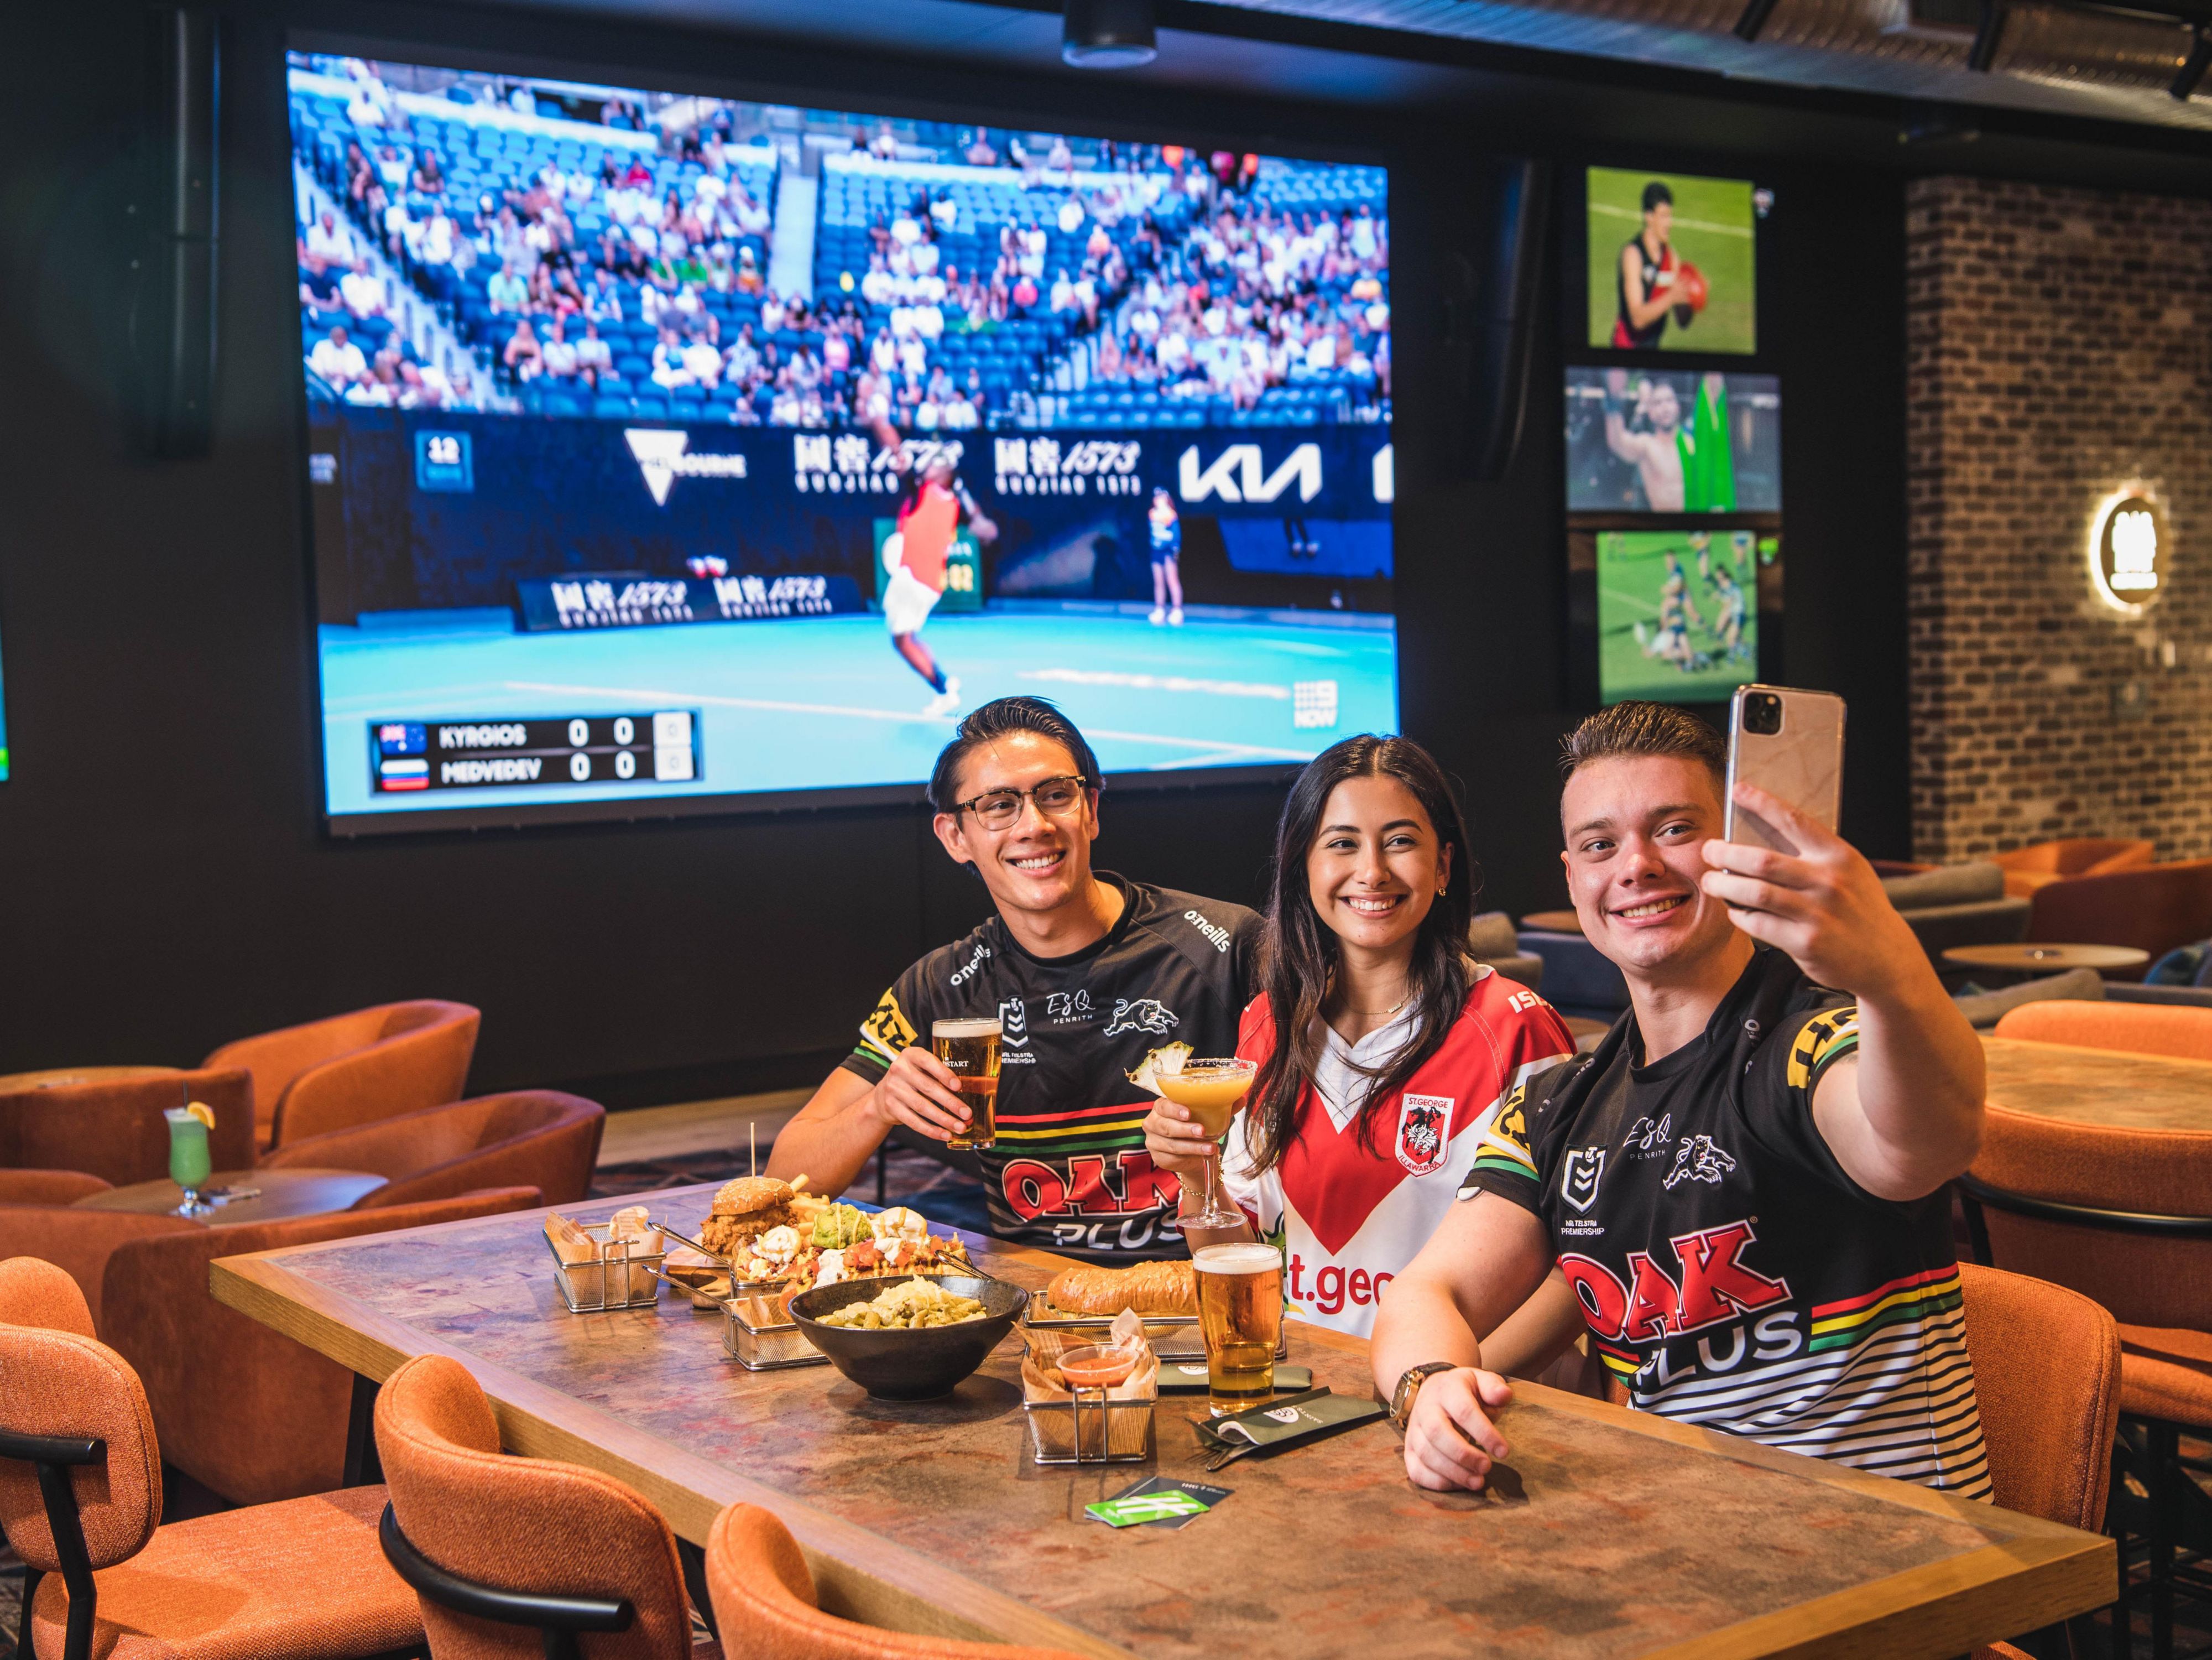 Saints Sports is quite literally in a league of its own. You can witness every big game, race, fight or match in one of the best sports bar in Sydney. With an extensive range of beverages including 18 beers on tap, signature cocktails, wine on tap, and multiple big screens, this is sport viewing fit for a king!